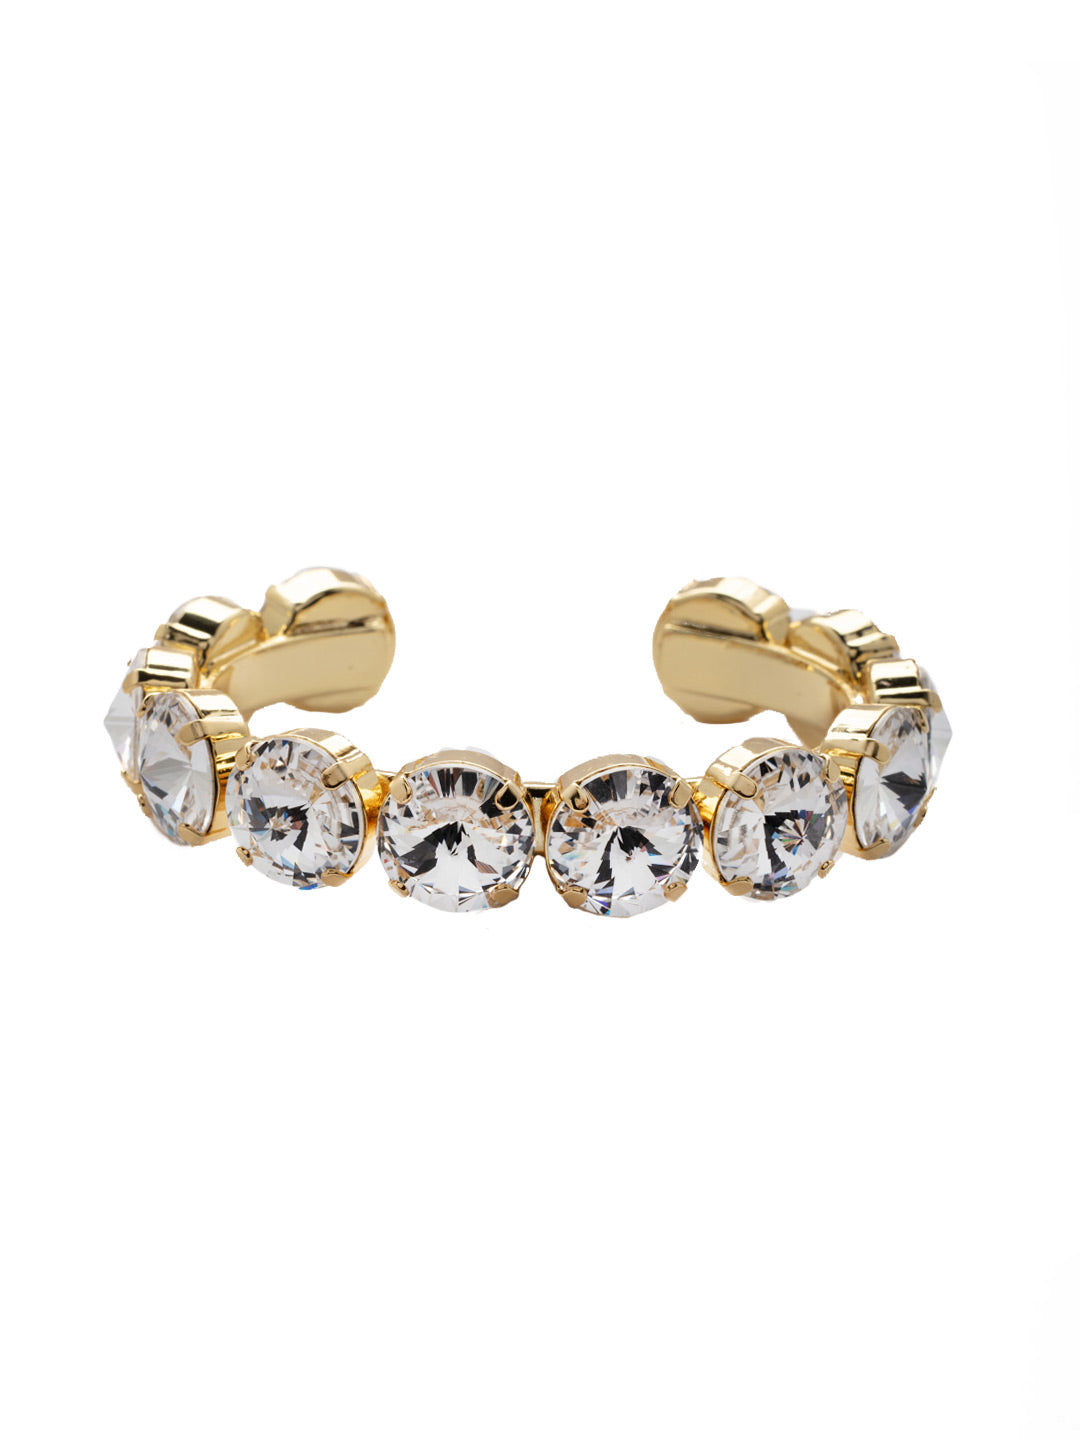 Nadine Cuff Bracelet - 4BEZ17BGCRY - <p>The Nadine Cuff Bracelet makes a bold statement; chunky round crystals fully encompass an adjustable metal band. From Sorrelli's Crystal collection in our Bright Gold-tone finish.</p>